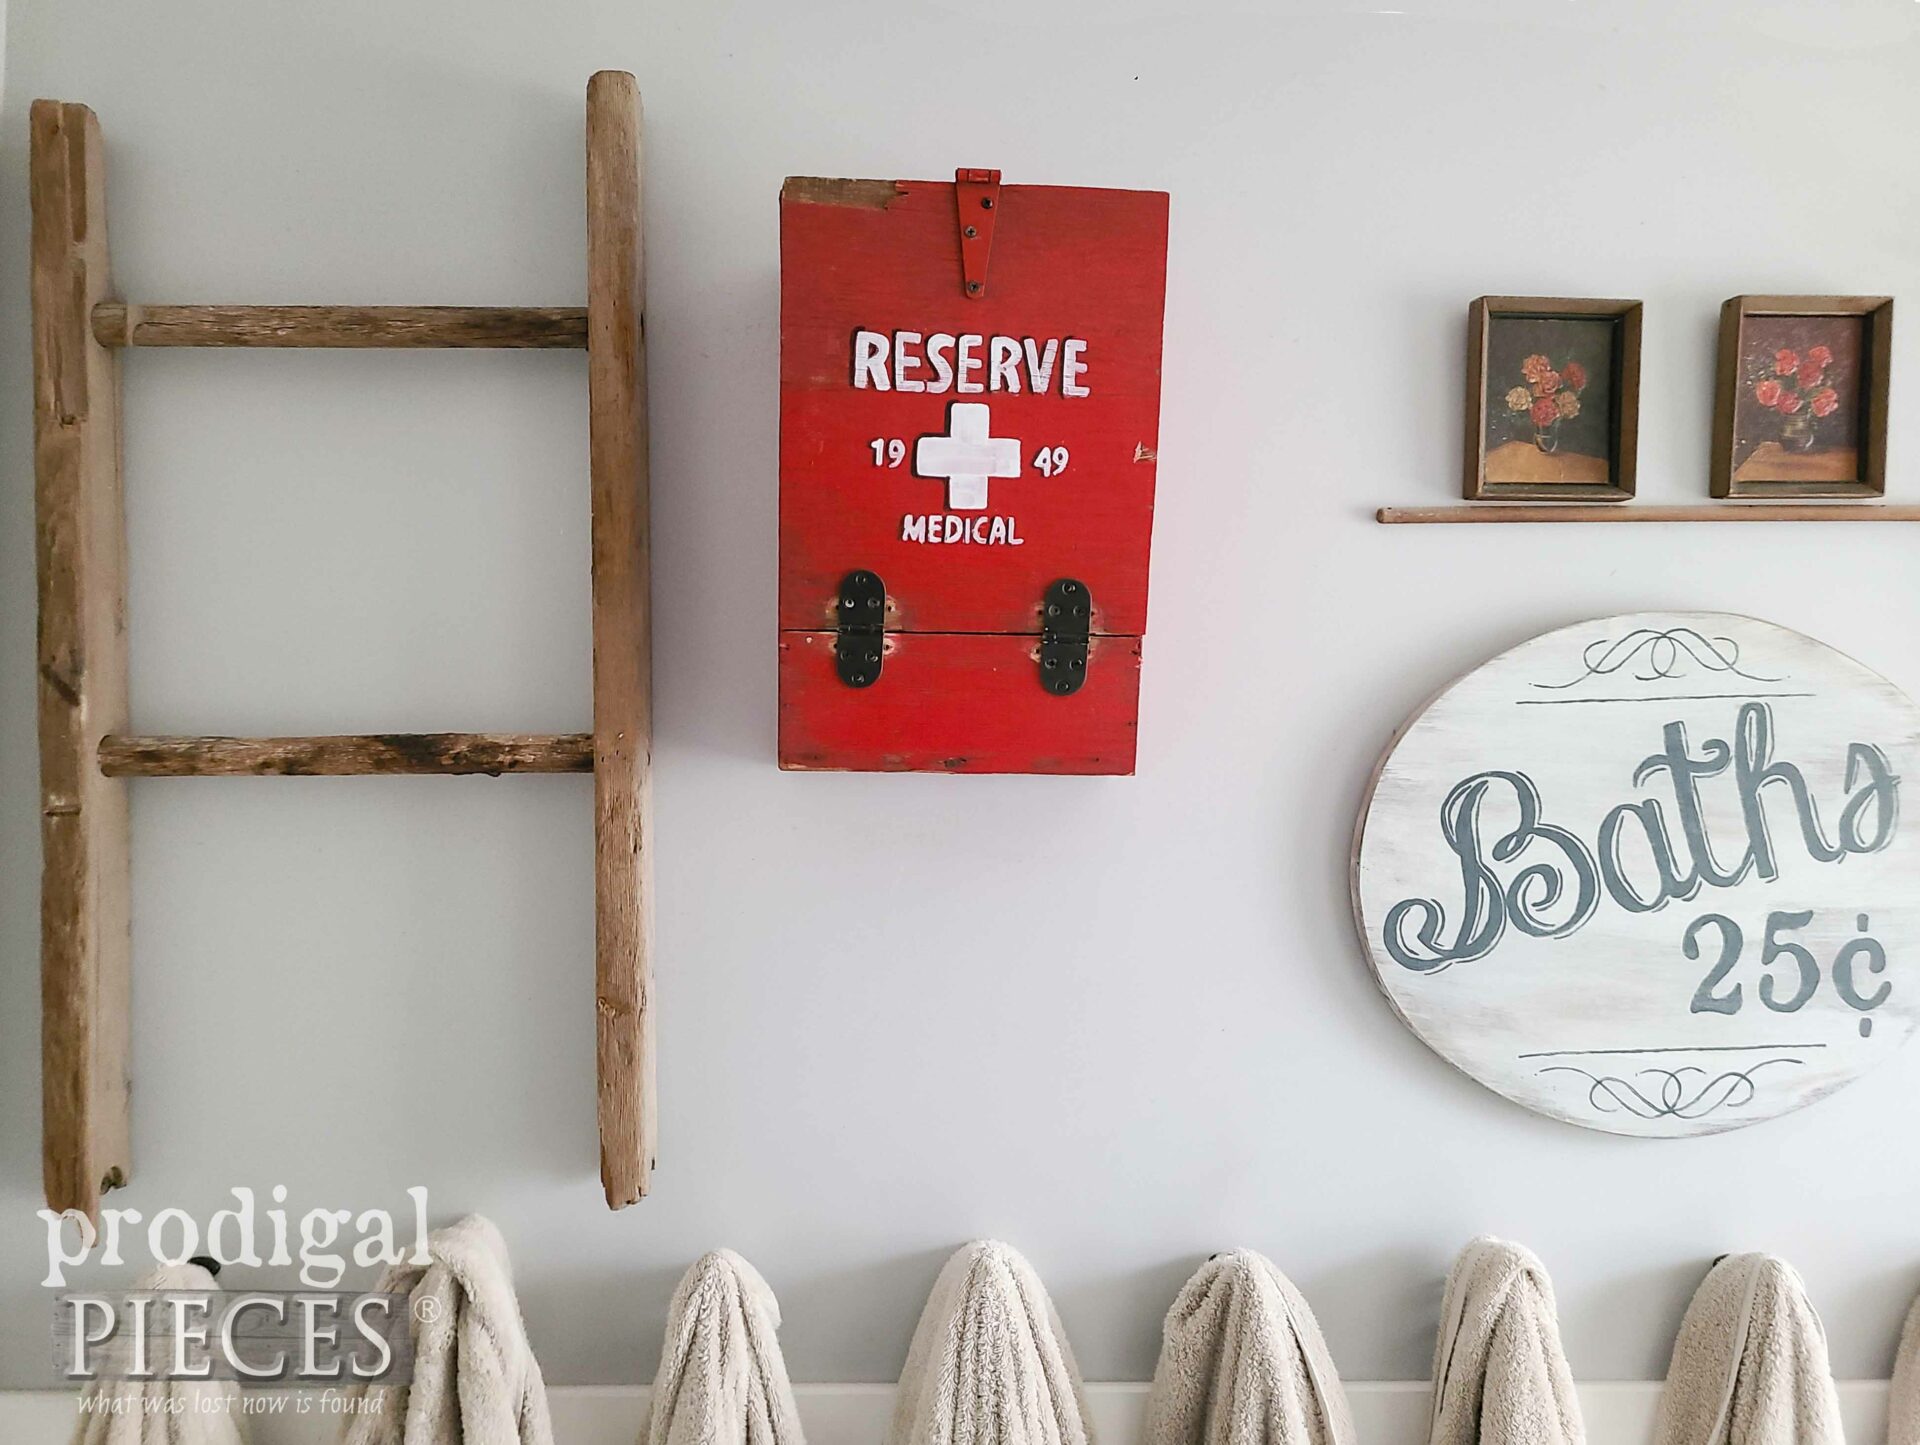 Red Swiss Antique Medical Box Upcycled by Larissa of Prodigal Pieces | prodigalpieces.com #prodigalpieces #diy #upcycled #farmhouse